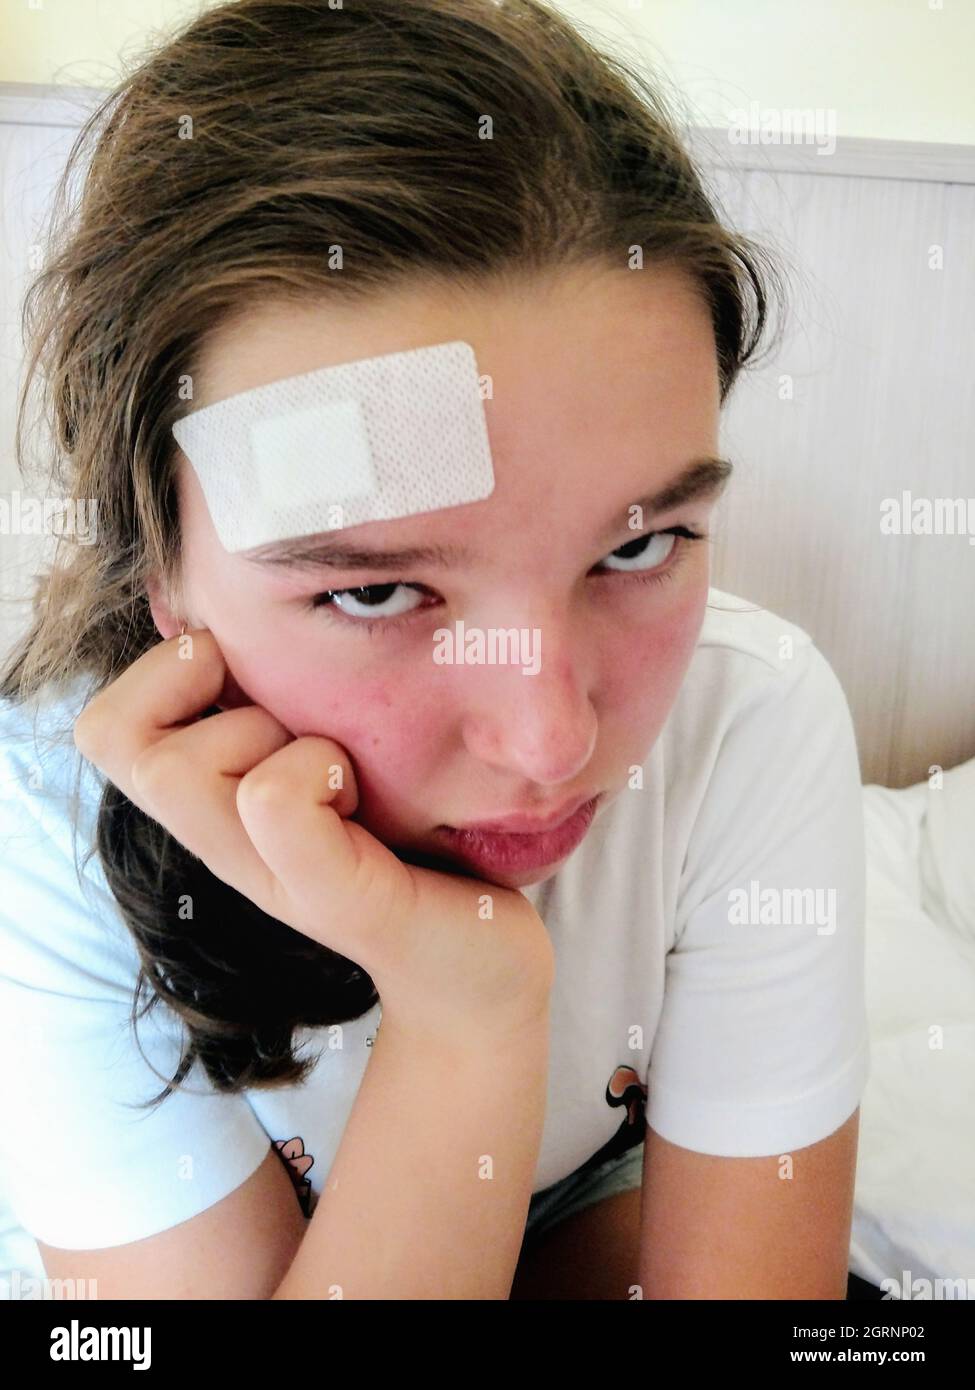 Close-up Portrait Of Girl With Bandage On Head Stock Photo